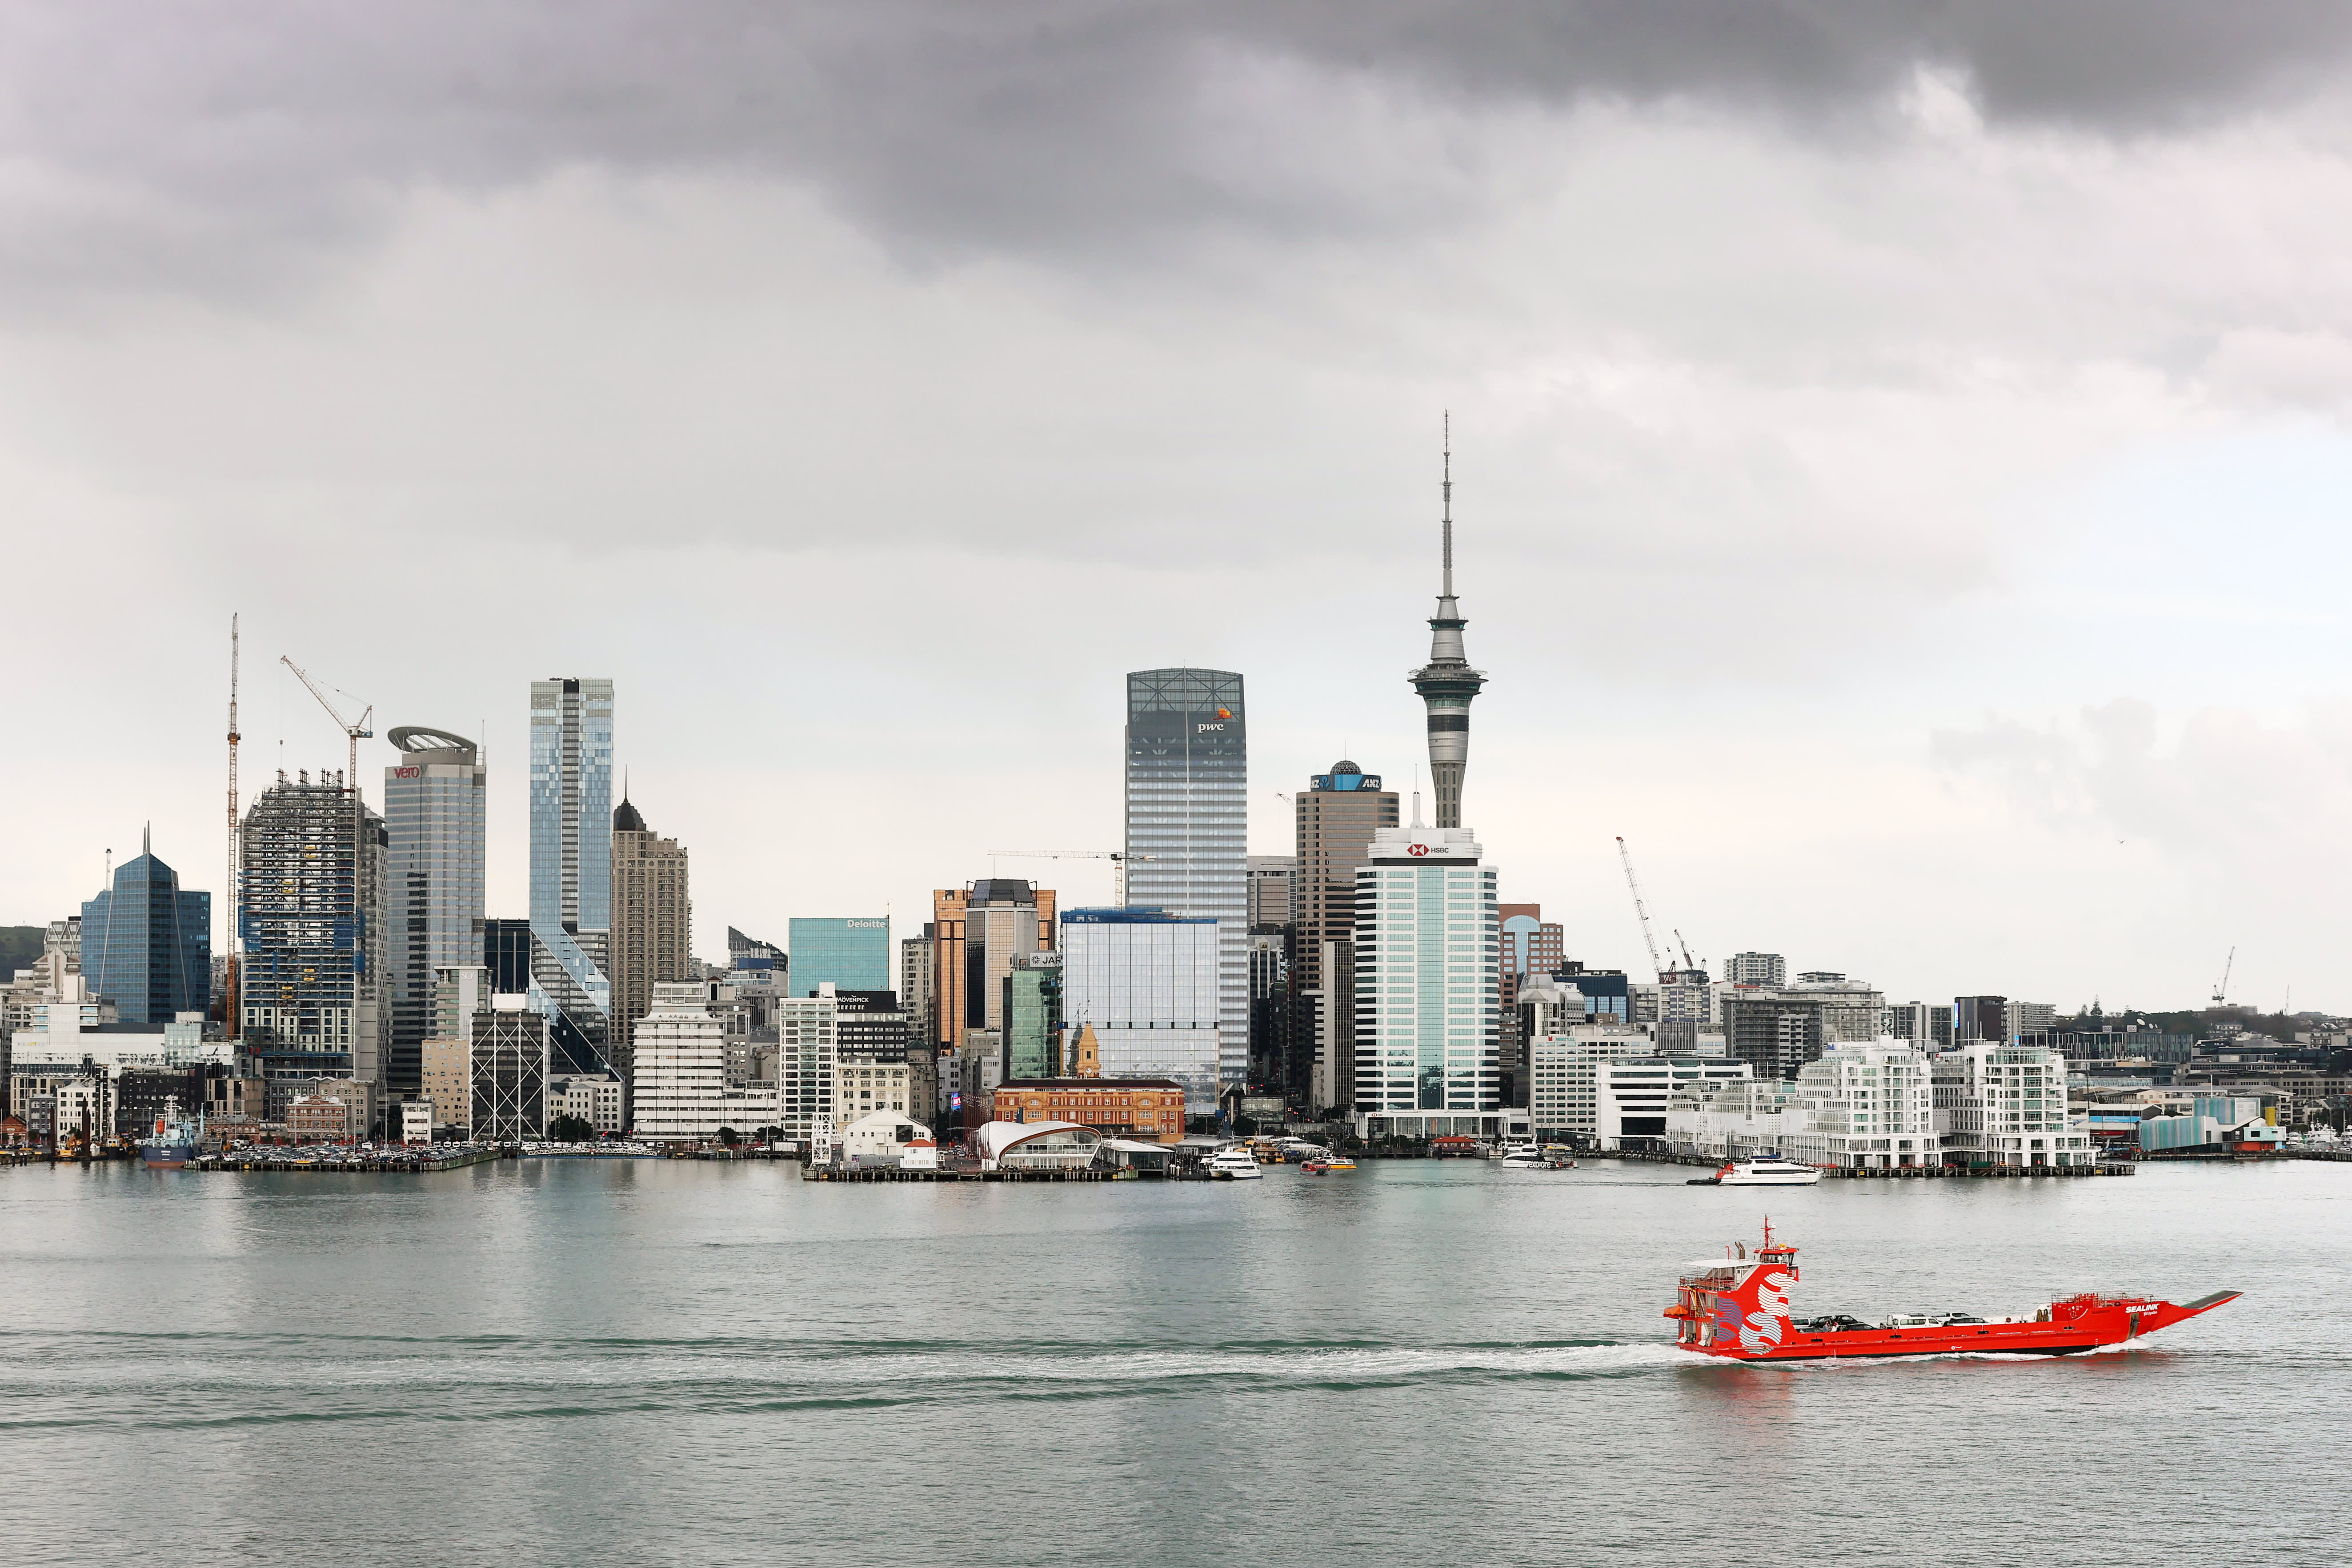 New Zealand enters a technical recession after the economy contracted 0.1% in the first quarter